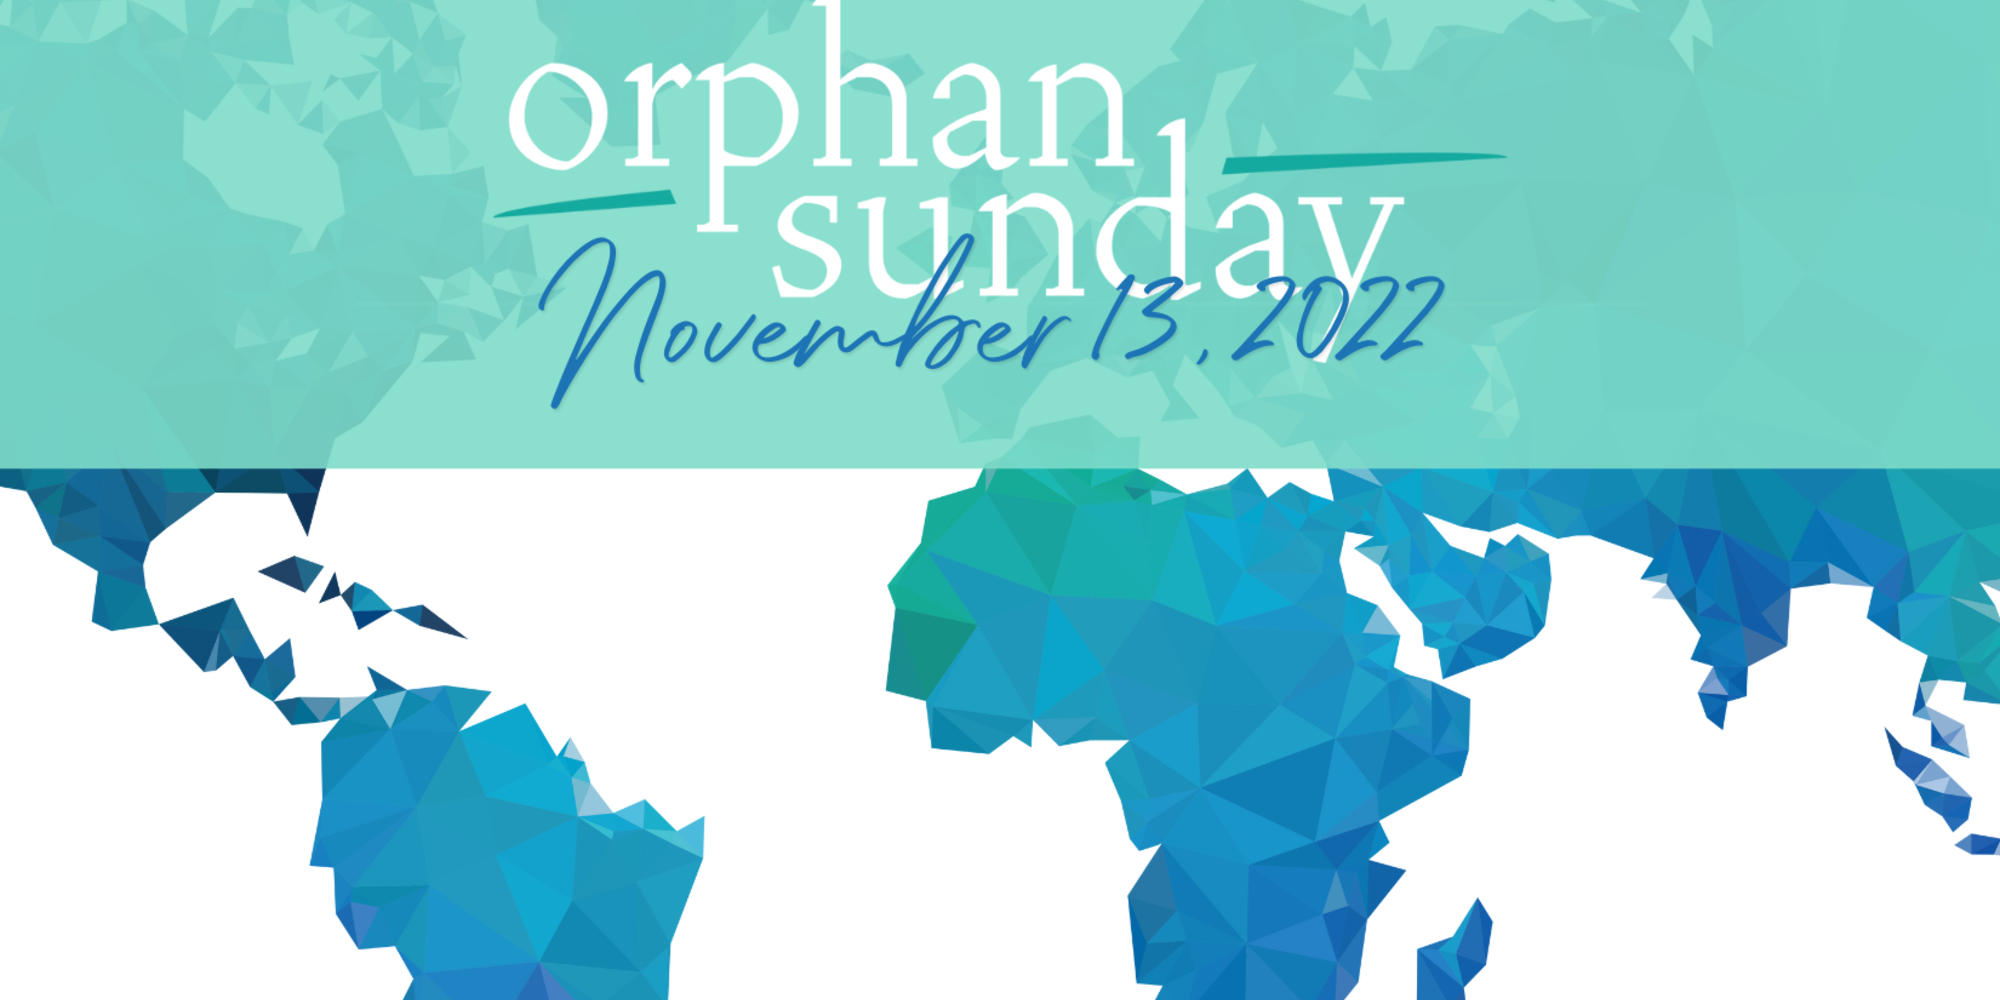 Let's pray together for a world without orphans